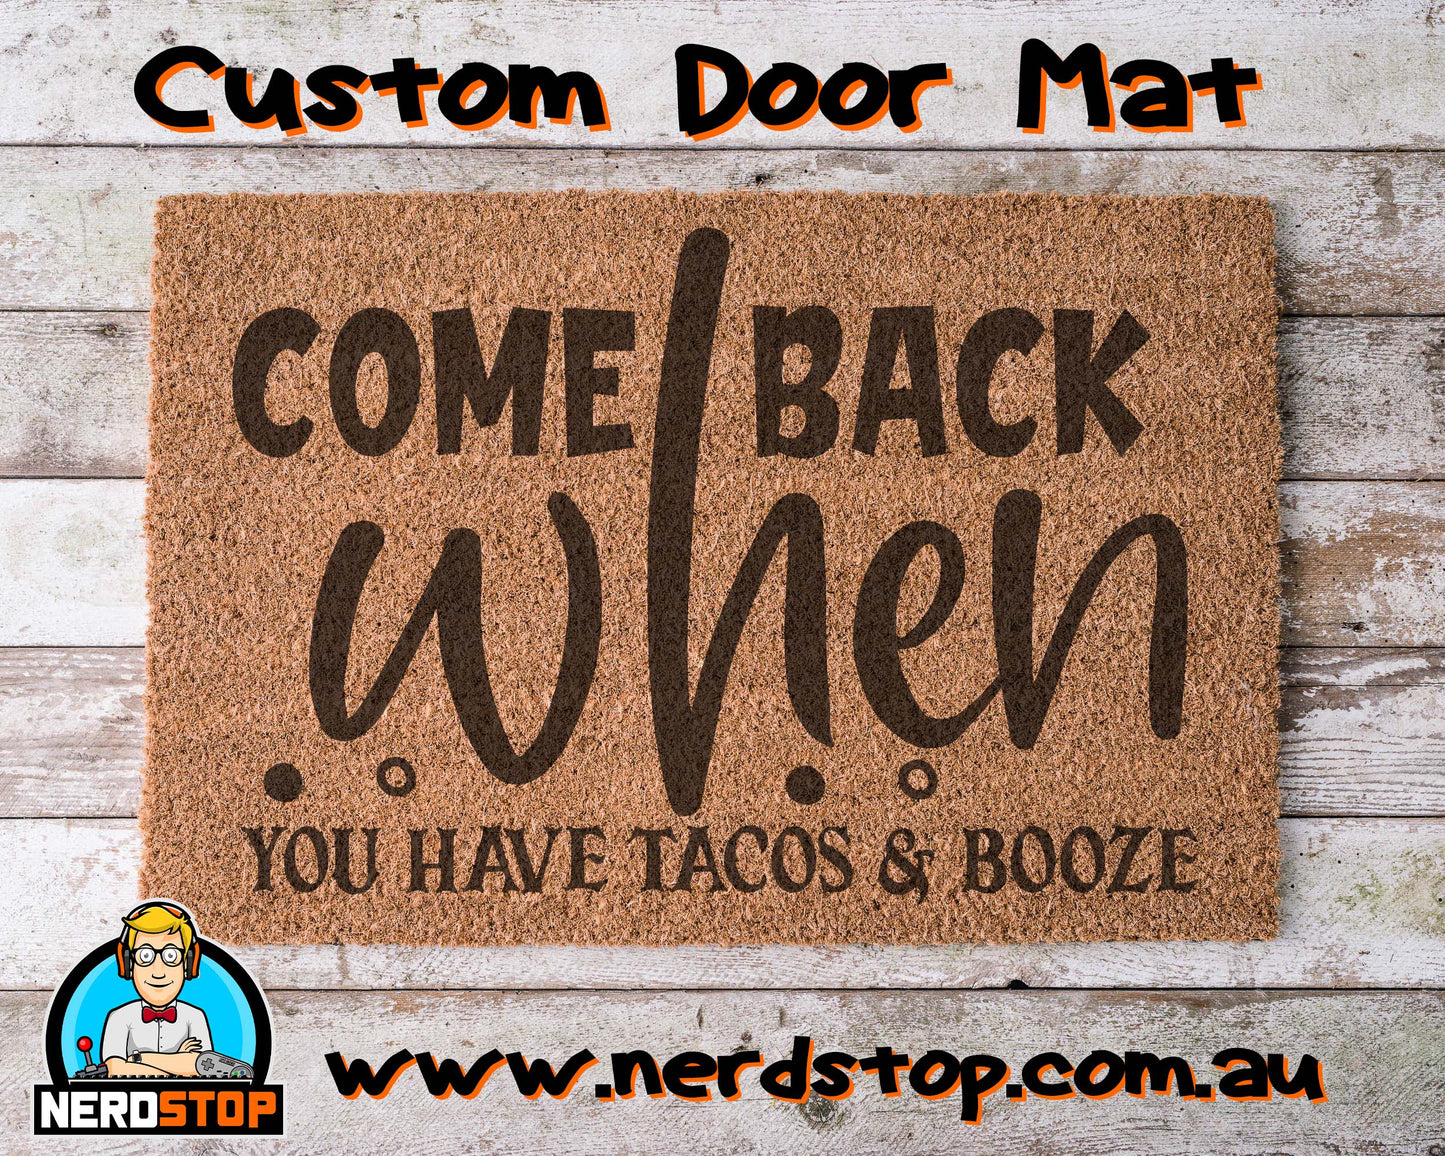 Coir Doormat - Come back when you have tacos and booze